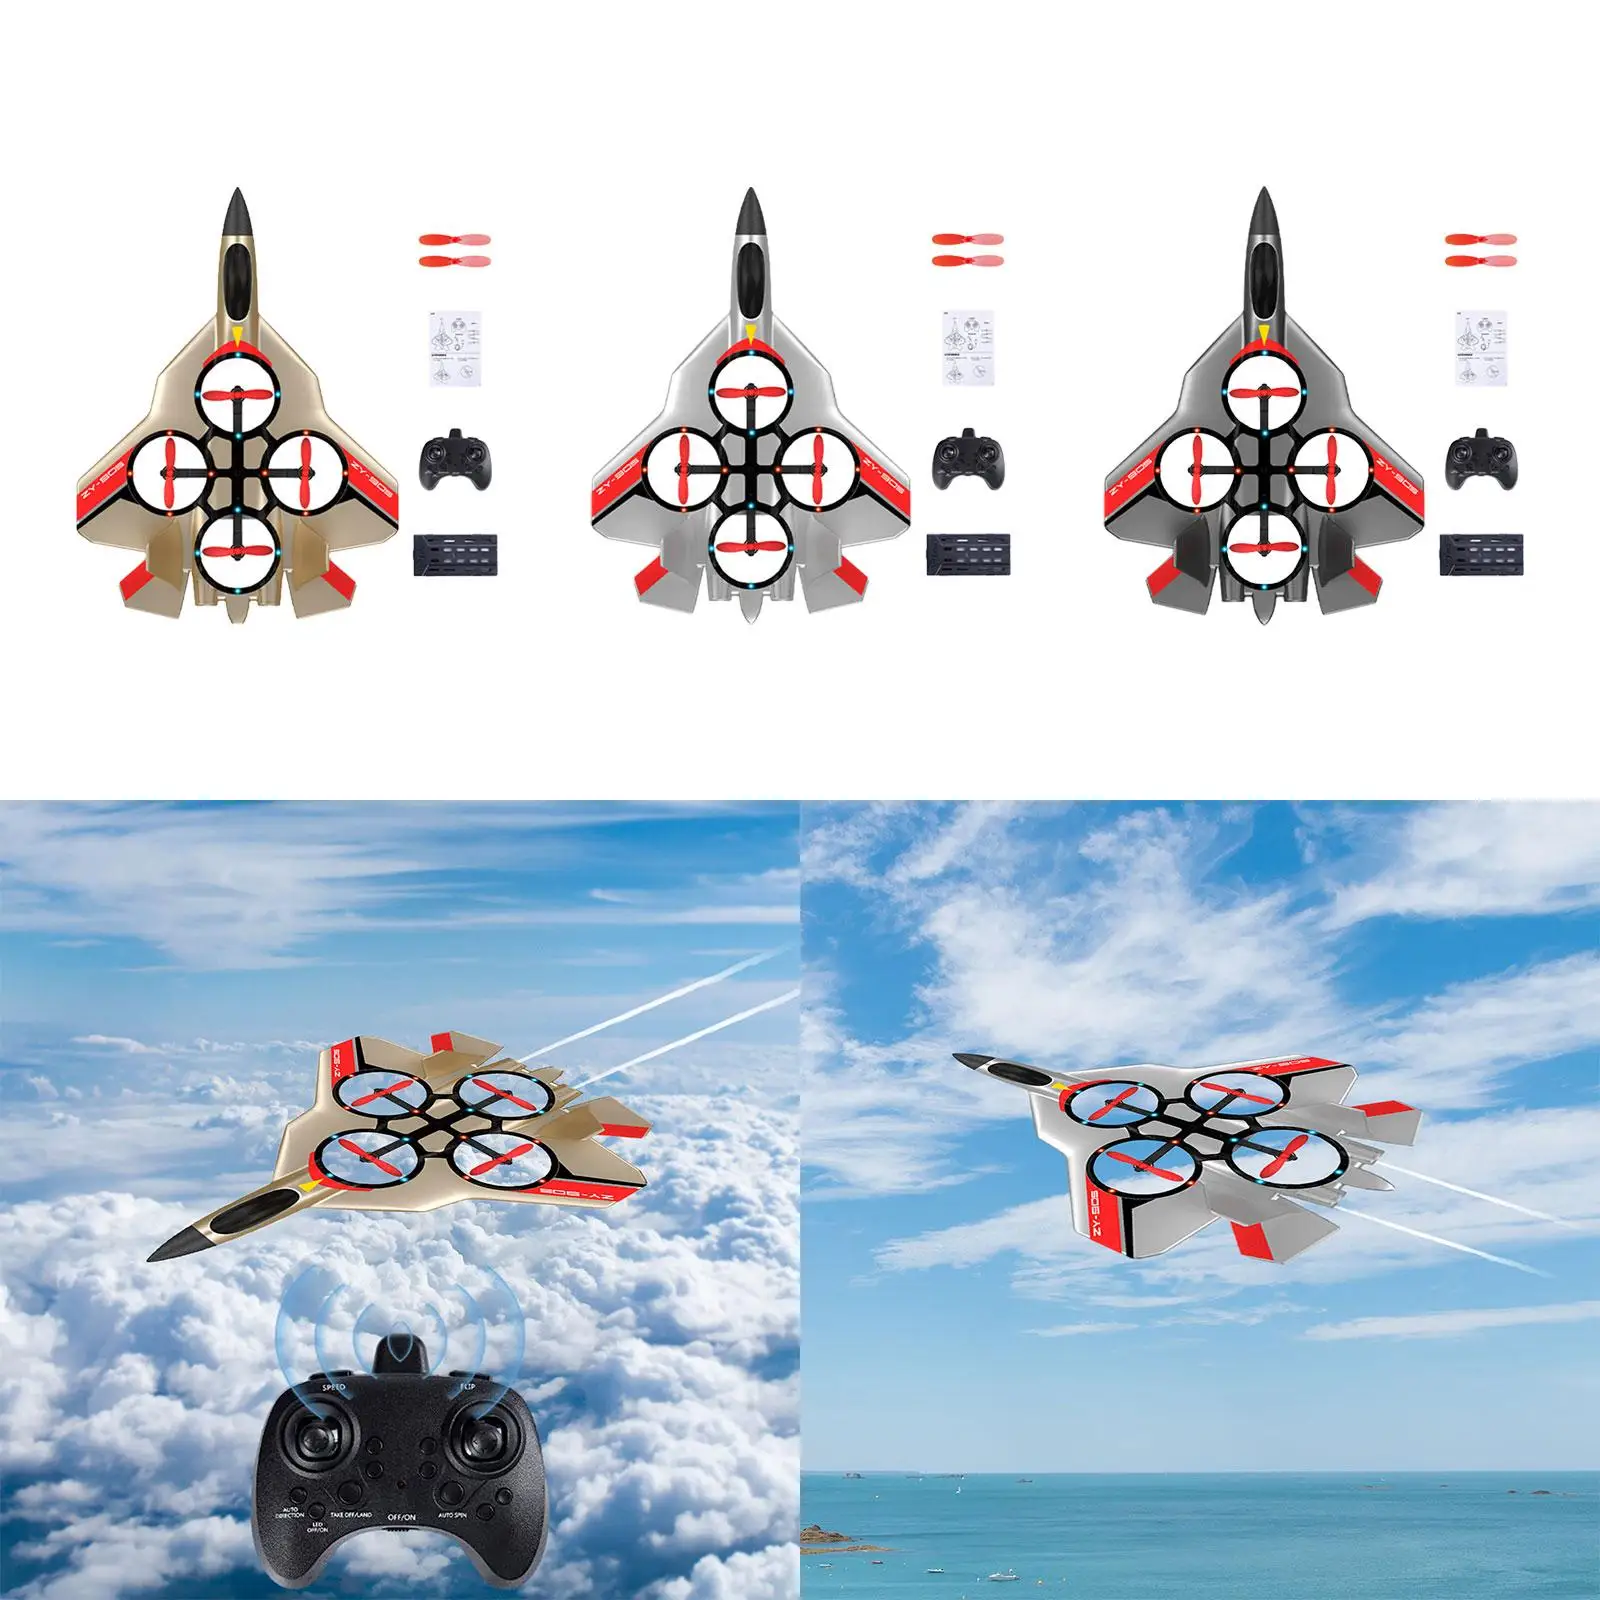 Foam RC Airplane Portable Lightweight Easy to Control Hobby RC Glider 4 CH Plane for Adults Boys Girls Beginner Kids Gift